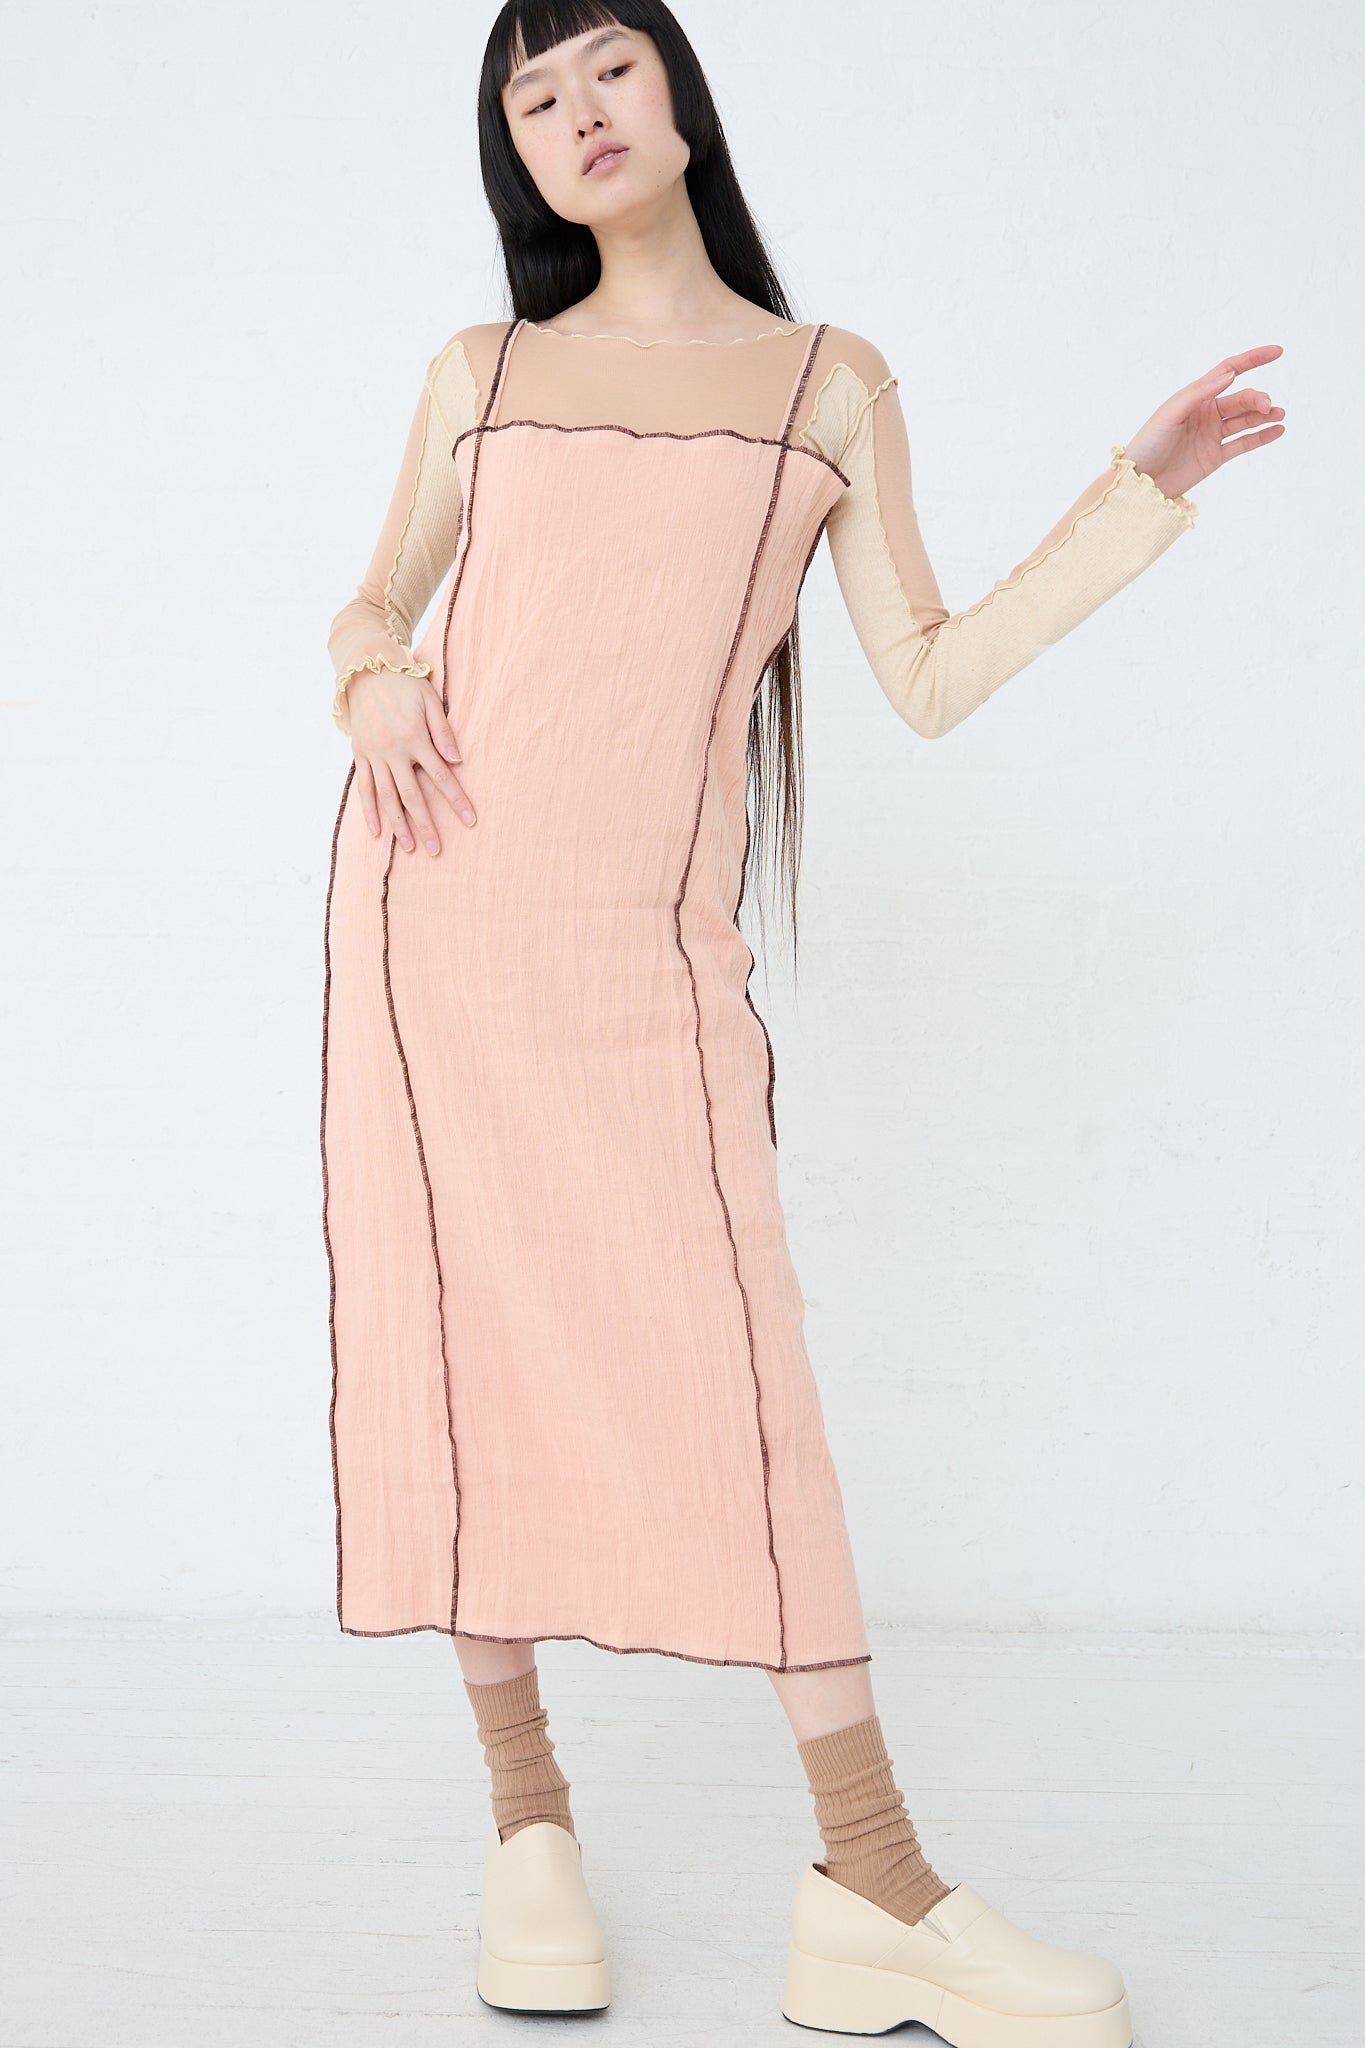 A woman wearing the Baserange Linen and Cotton Shok Slip Dress in Rose, paired with pink socks and white clogs. Front view and full length